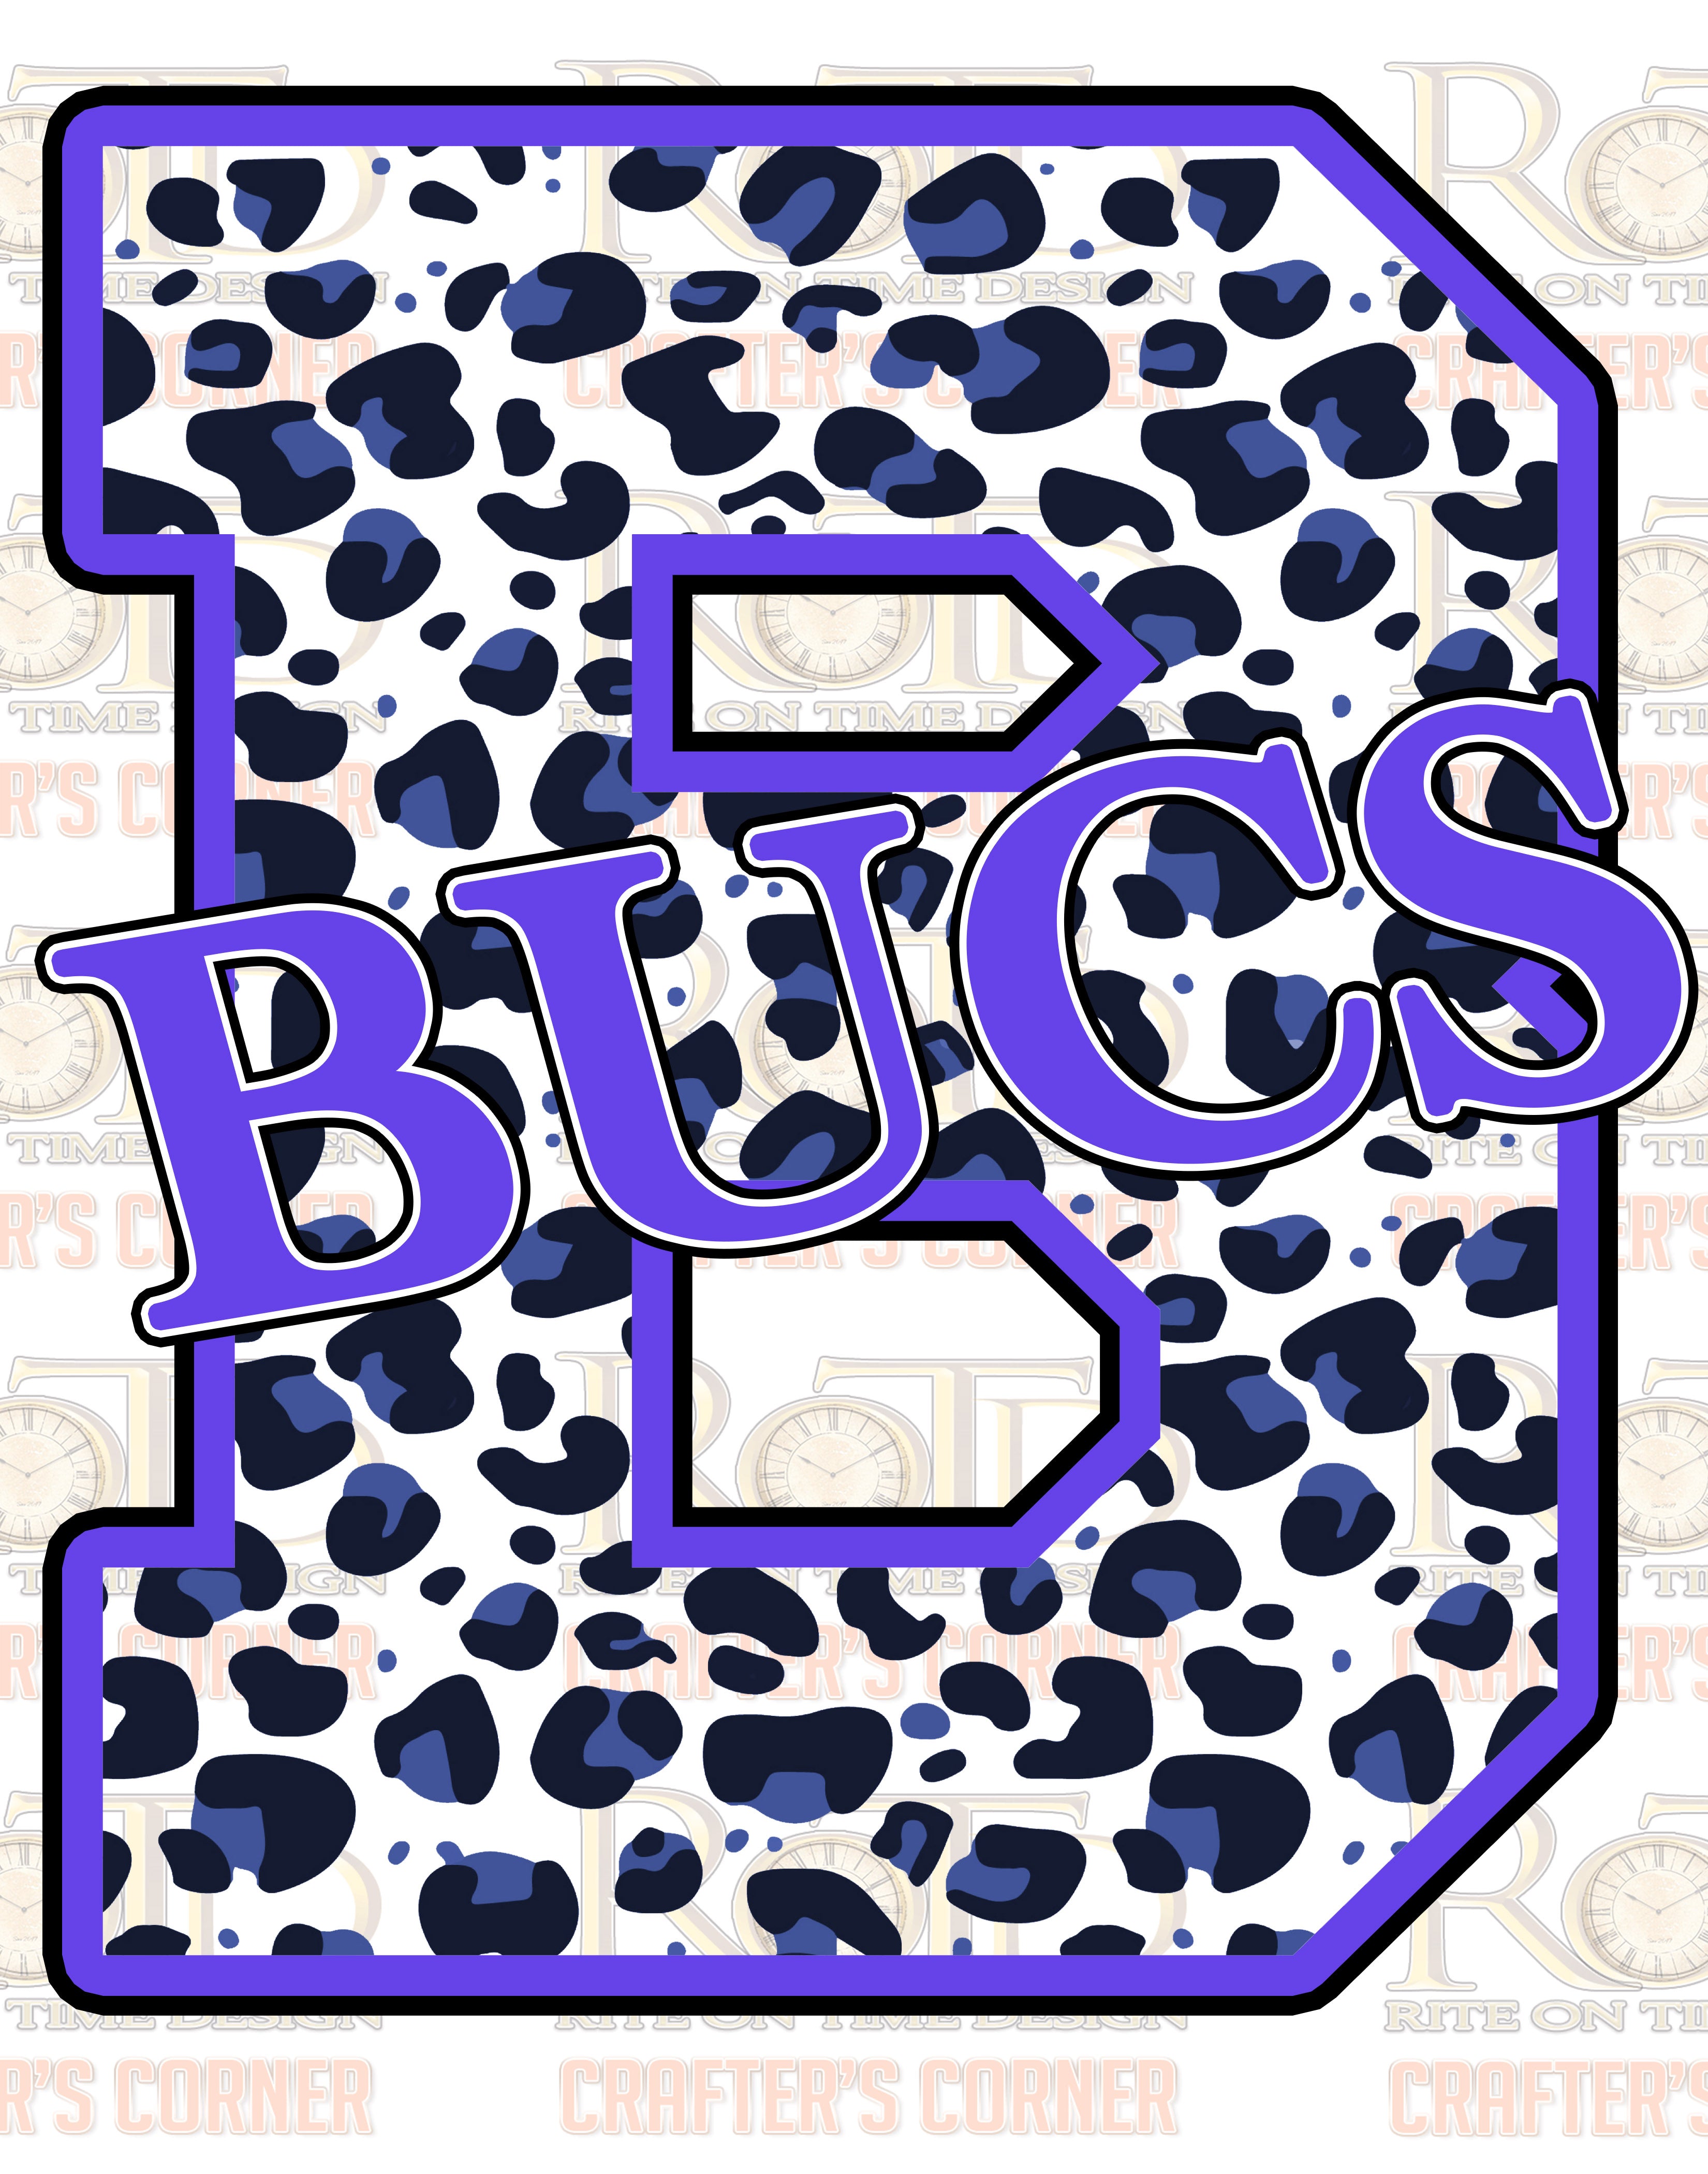 DTF Screen Print Image - B is for Belvidere Bucs